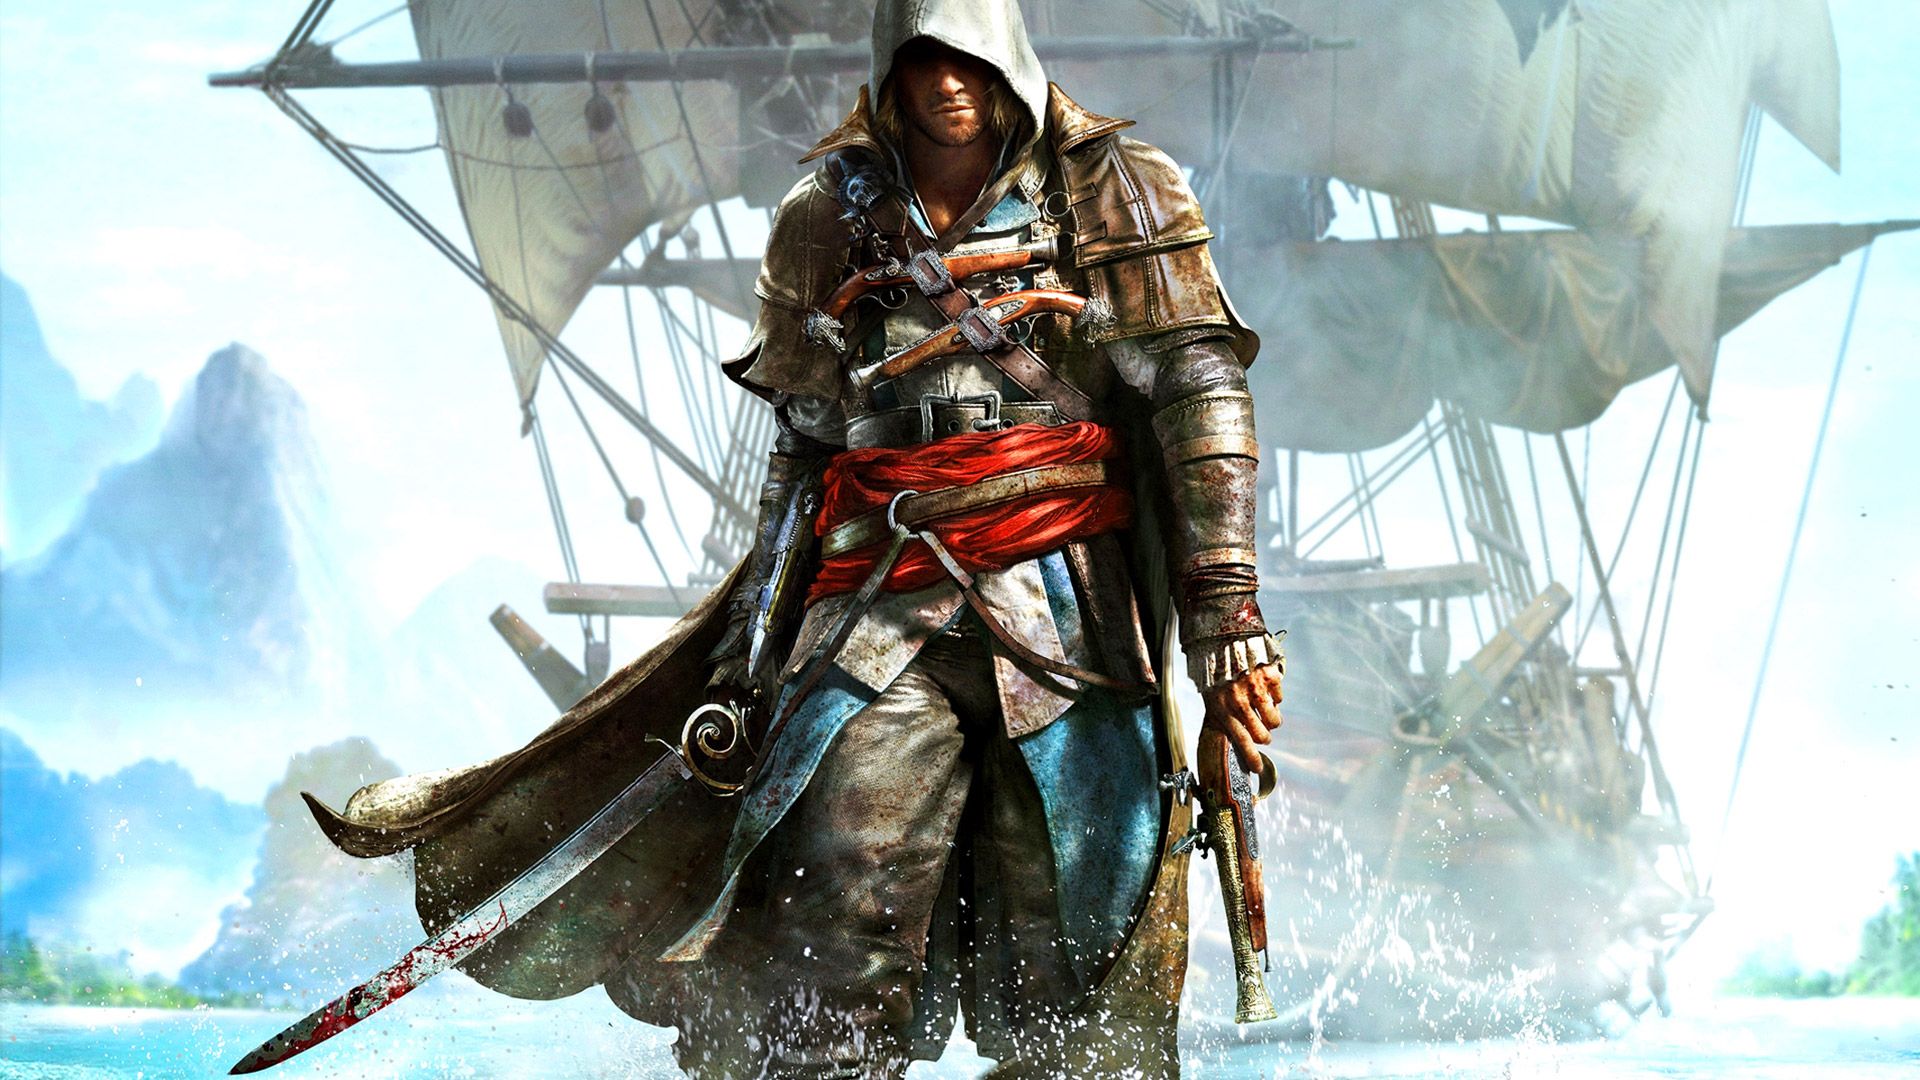 Assassin's Creed IV: Black Flag Wallpapers in 1920x1080